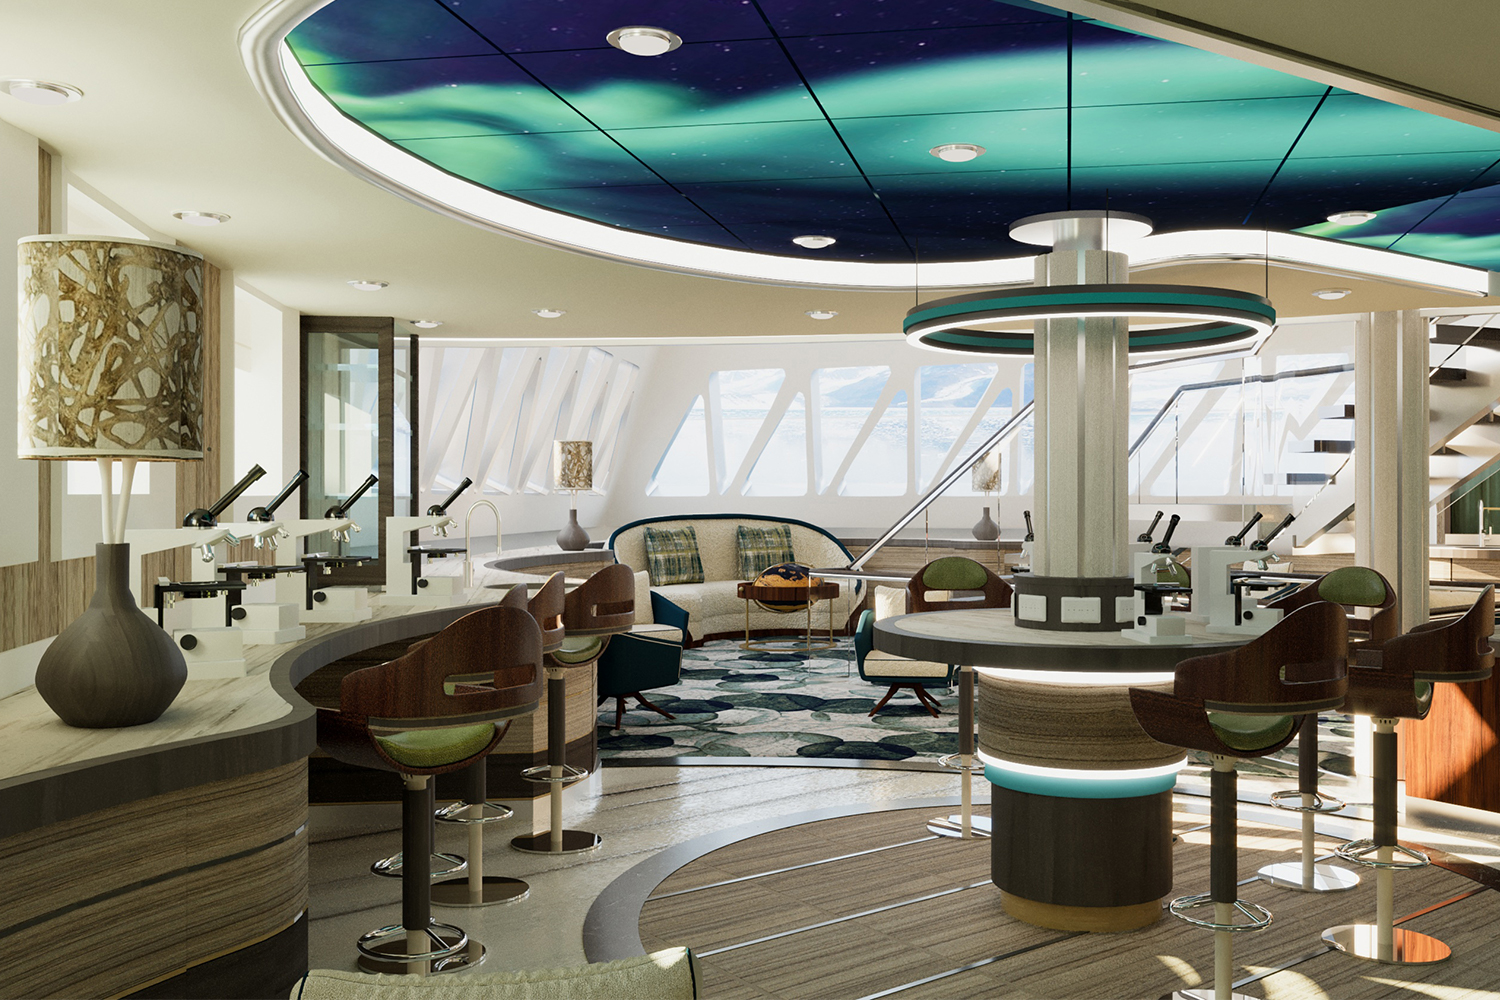 A rendering of the science center on the new Sylvia Earle boat from Aurora Expeditions